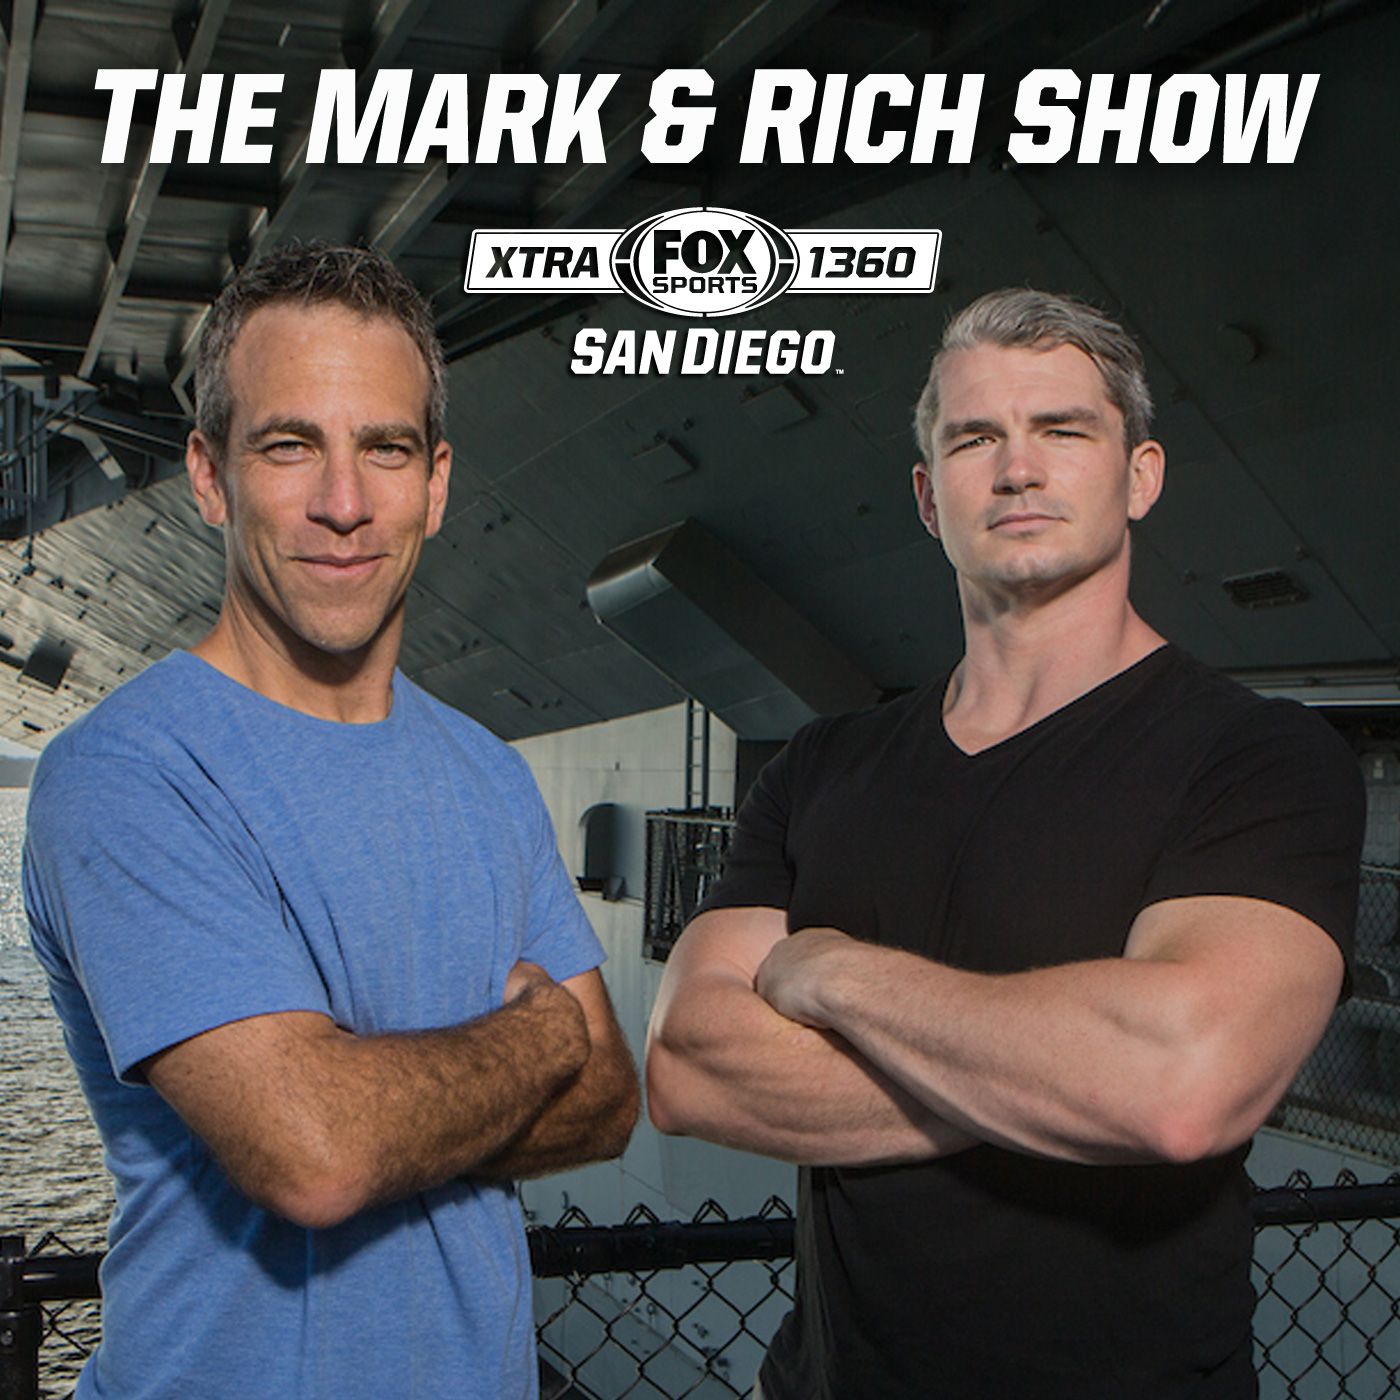 The Mark & Rich Show